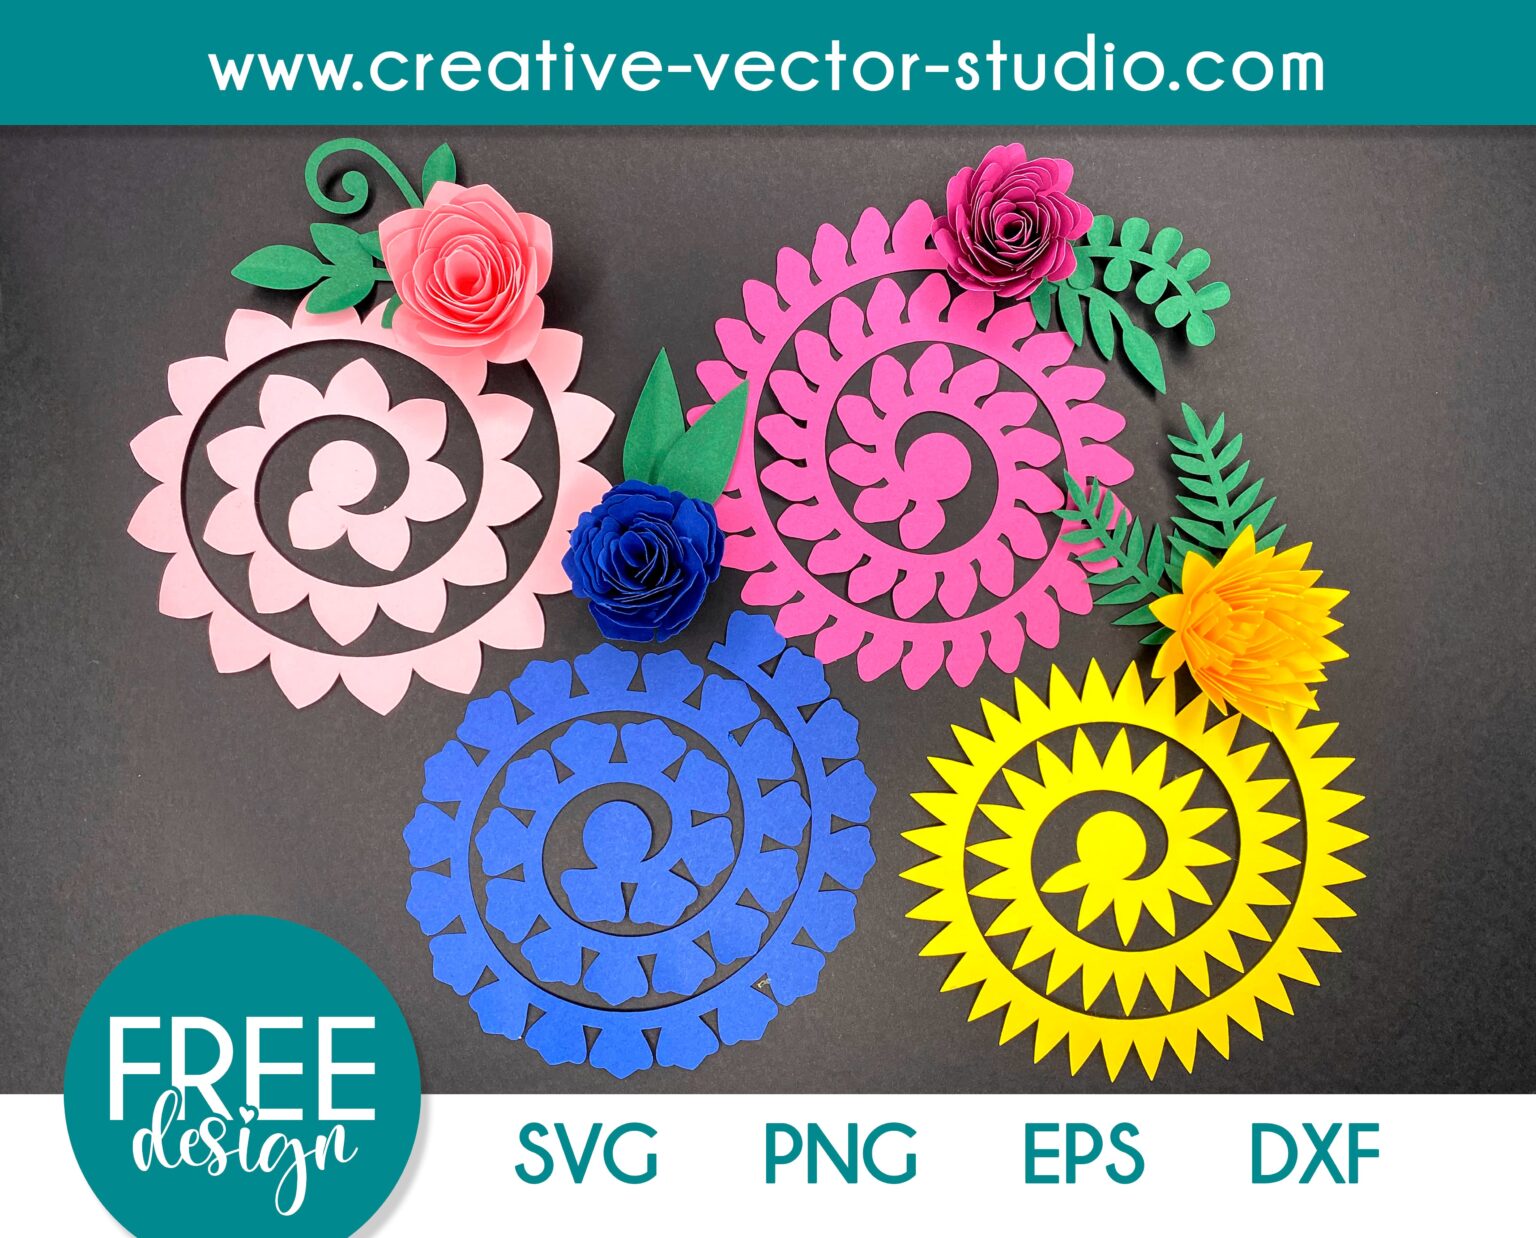 Rolled Flower Templates 3d Flowers Svg Dxf Eps Jpeg Pdf By